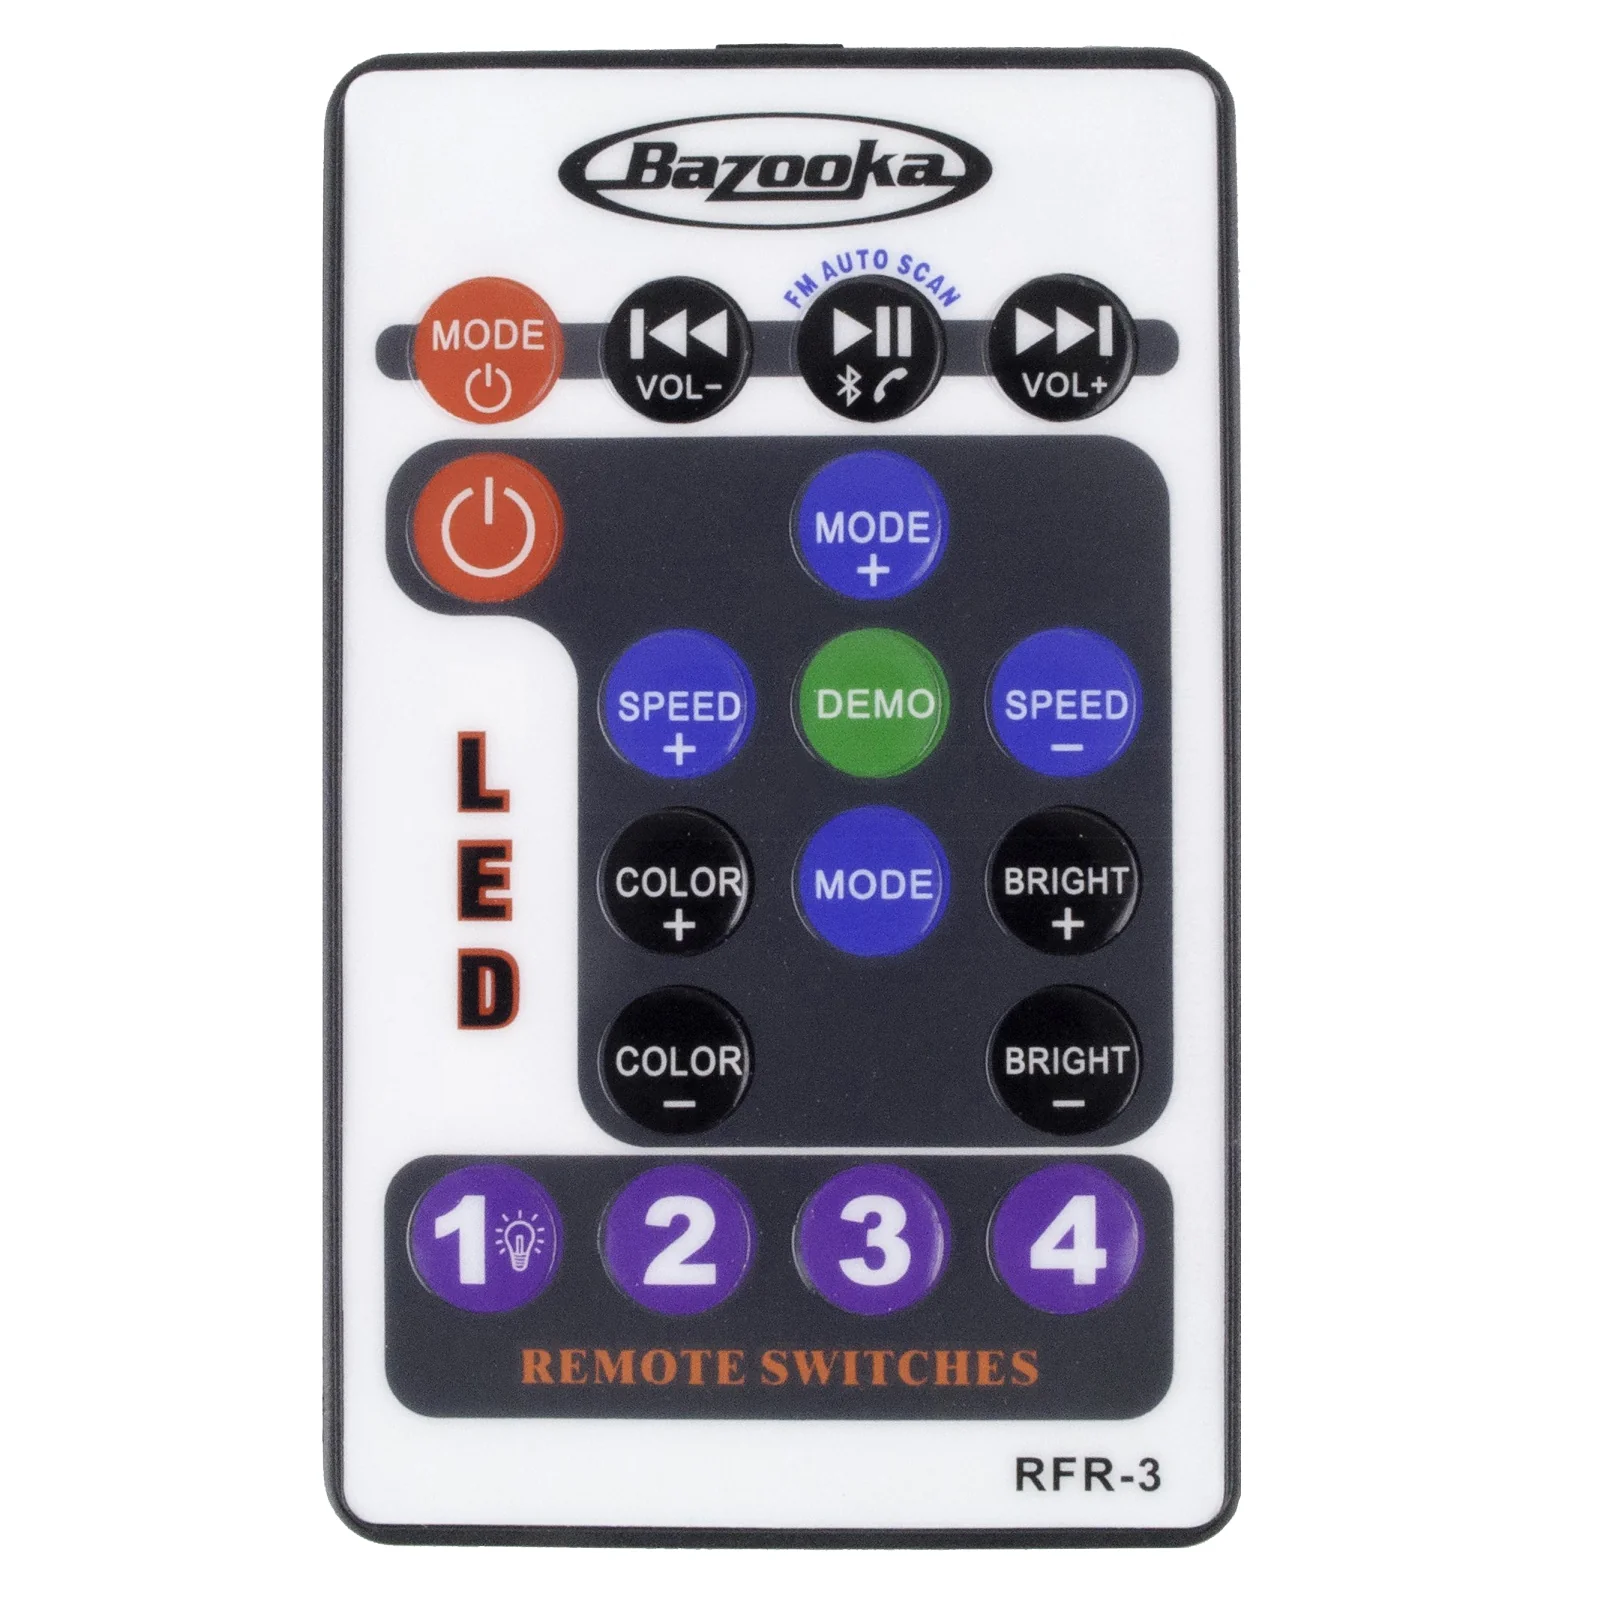 RFR-3 Remote Control for Party Bar with FM Questions & Answers